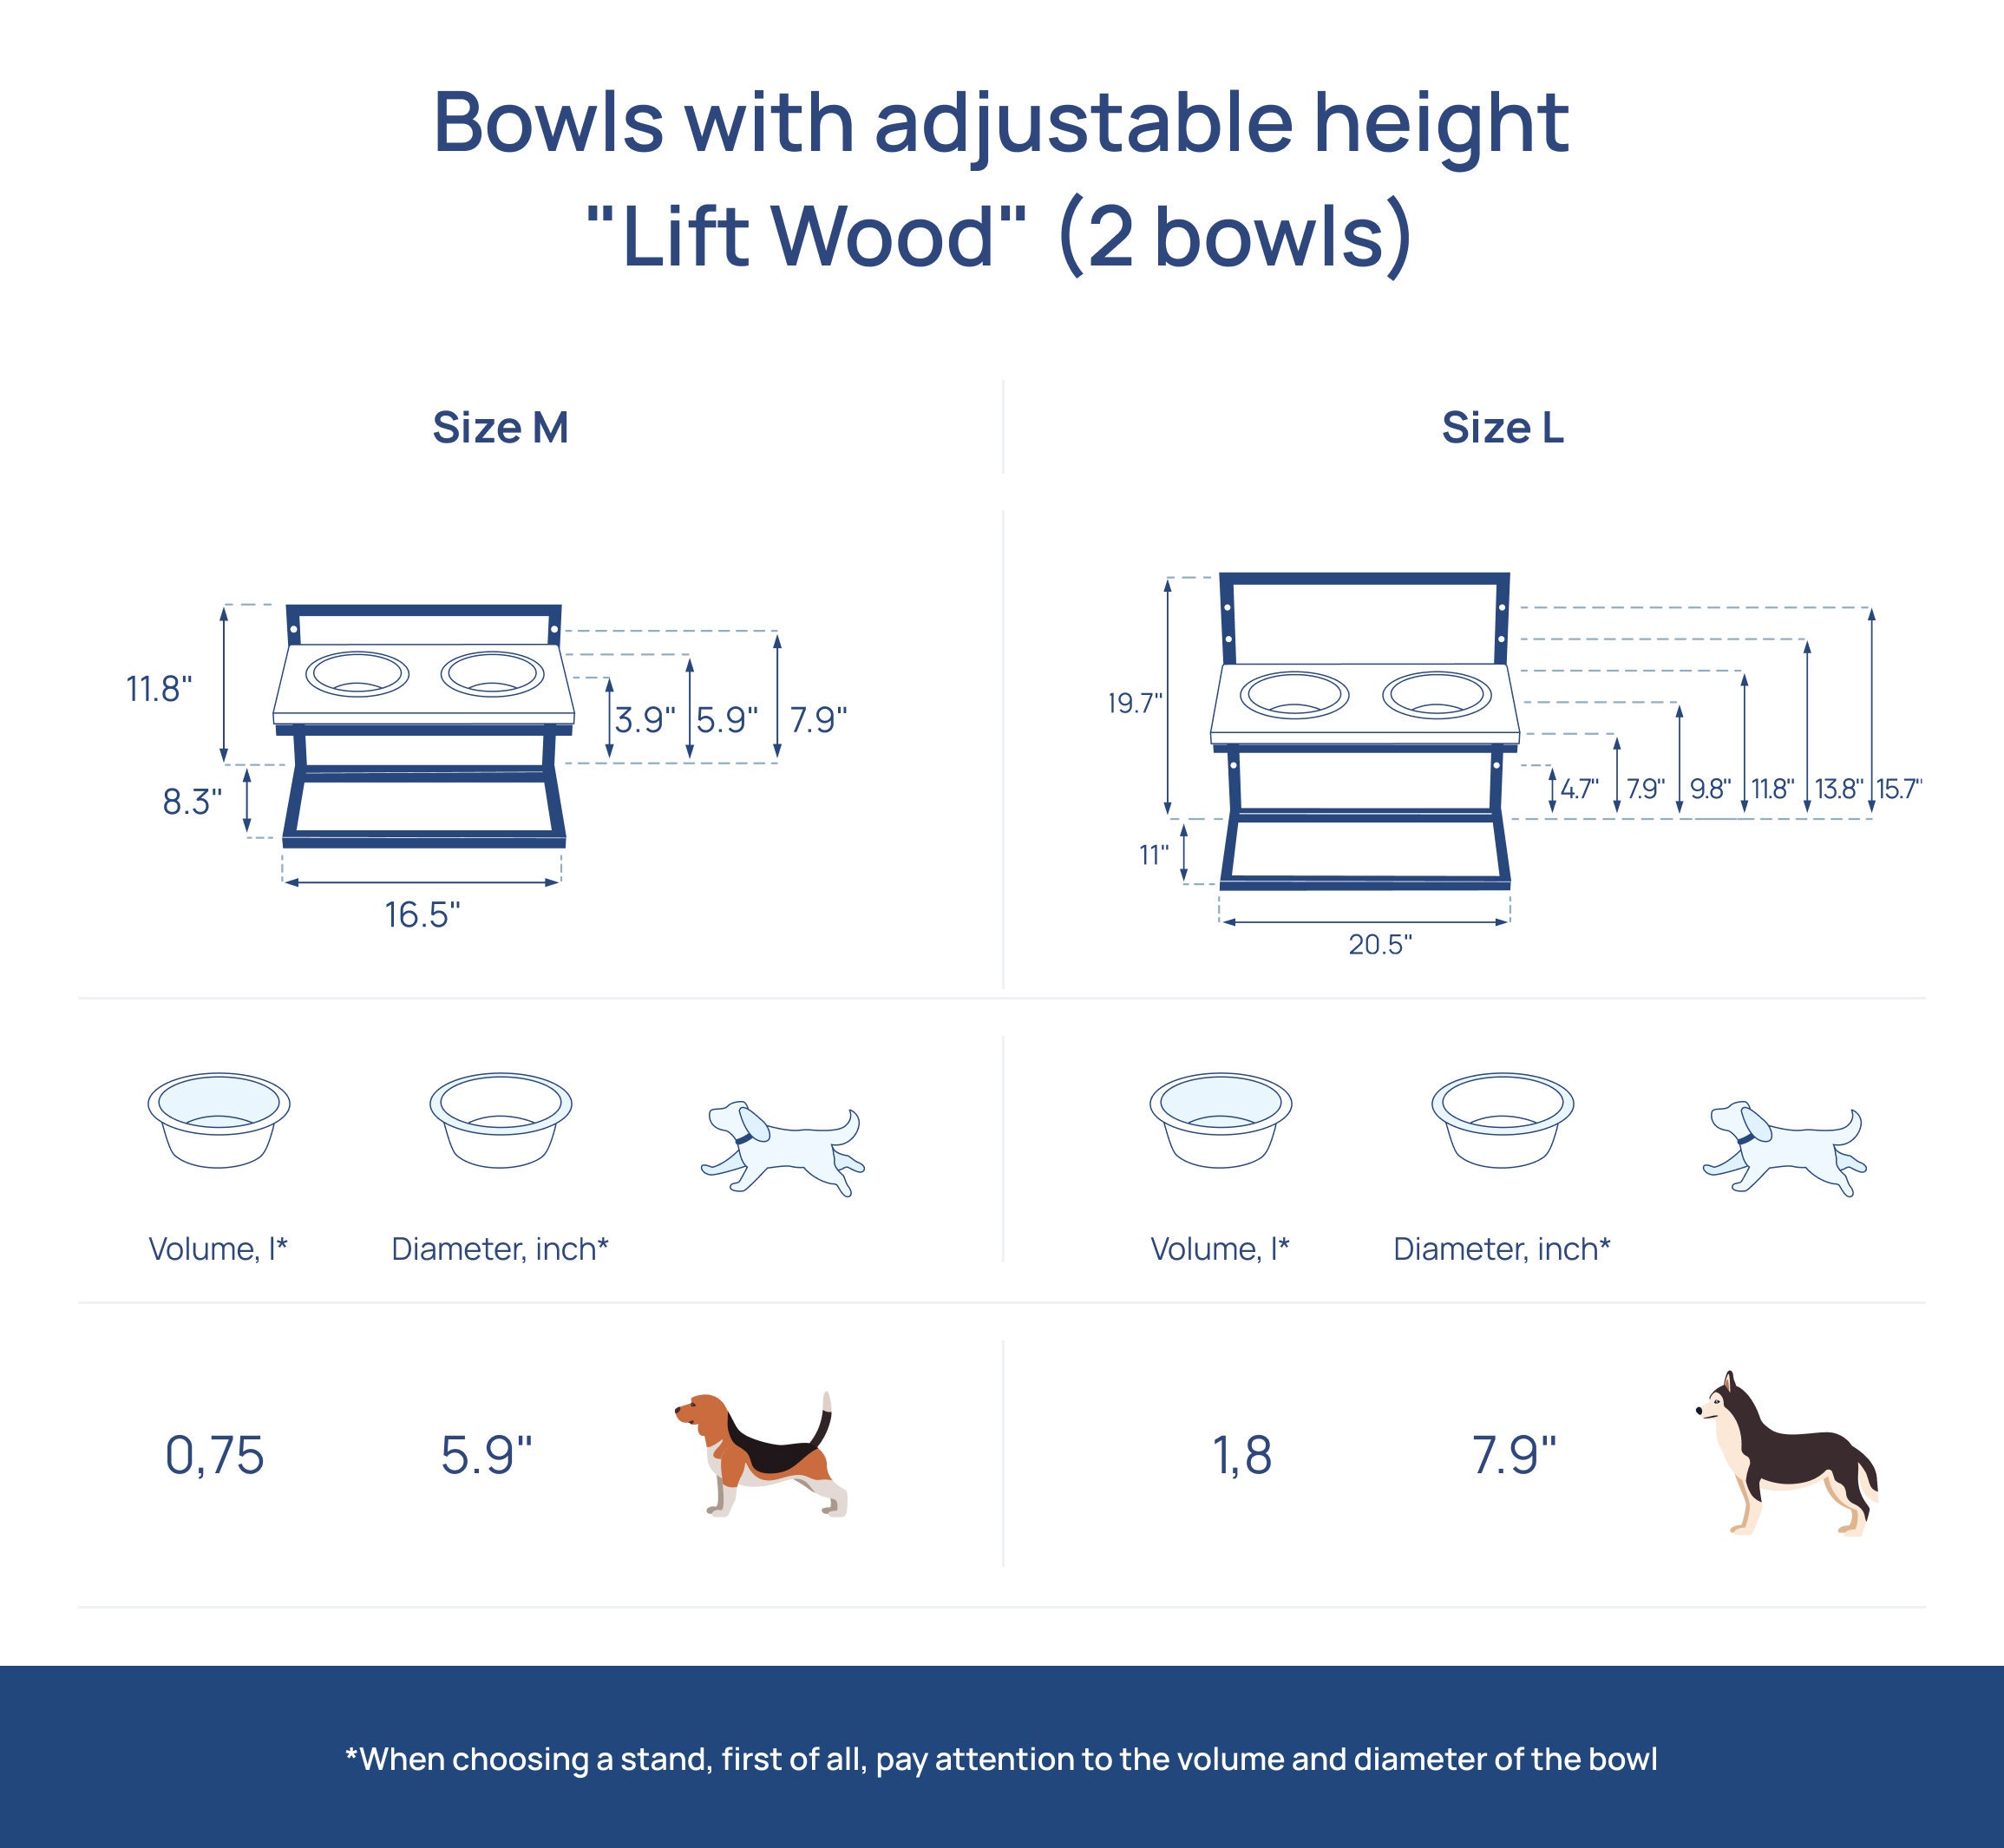 PawHut Elevated Dog Feeder with 2 Stainless Steel Bowls Twin Raised  Adjustable Pet Food Platform for Small Medium Large Dogs Natural